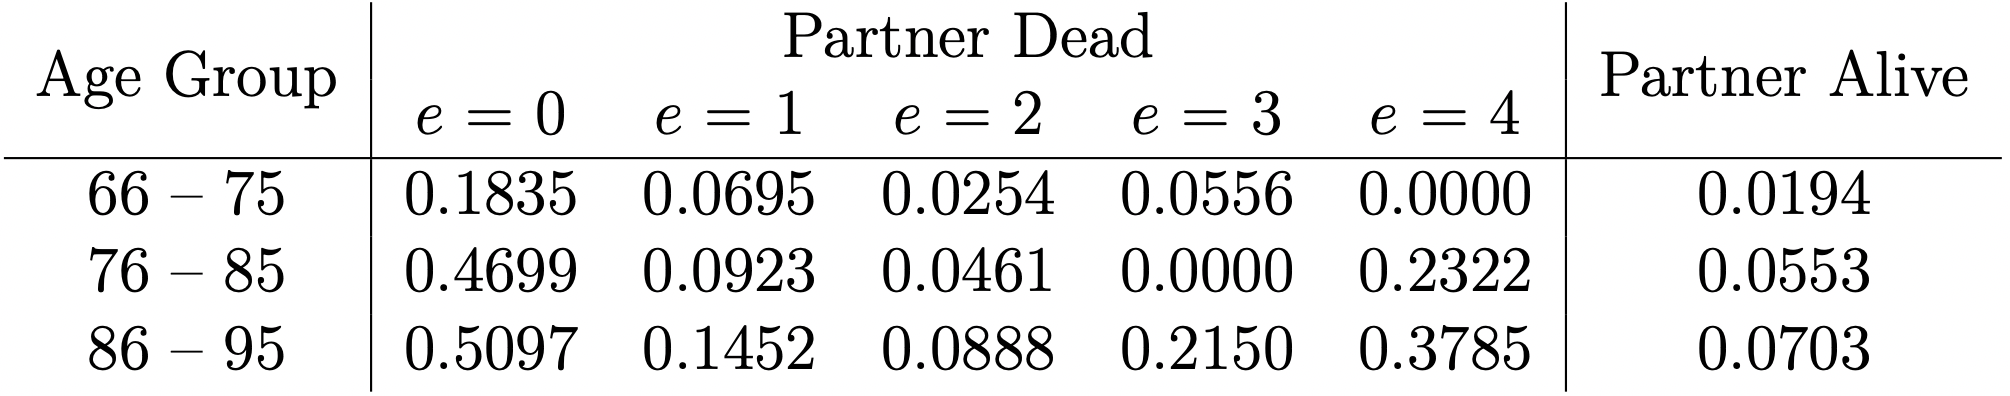 Mortality Rates for Married Men and Widowers, with $e$ Denoting the Number of Years since Partner’s Death